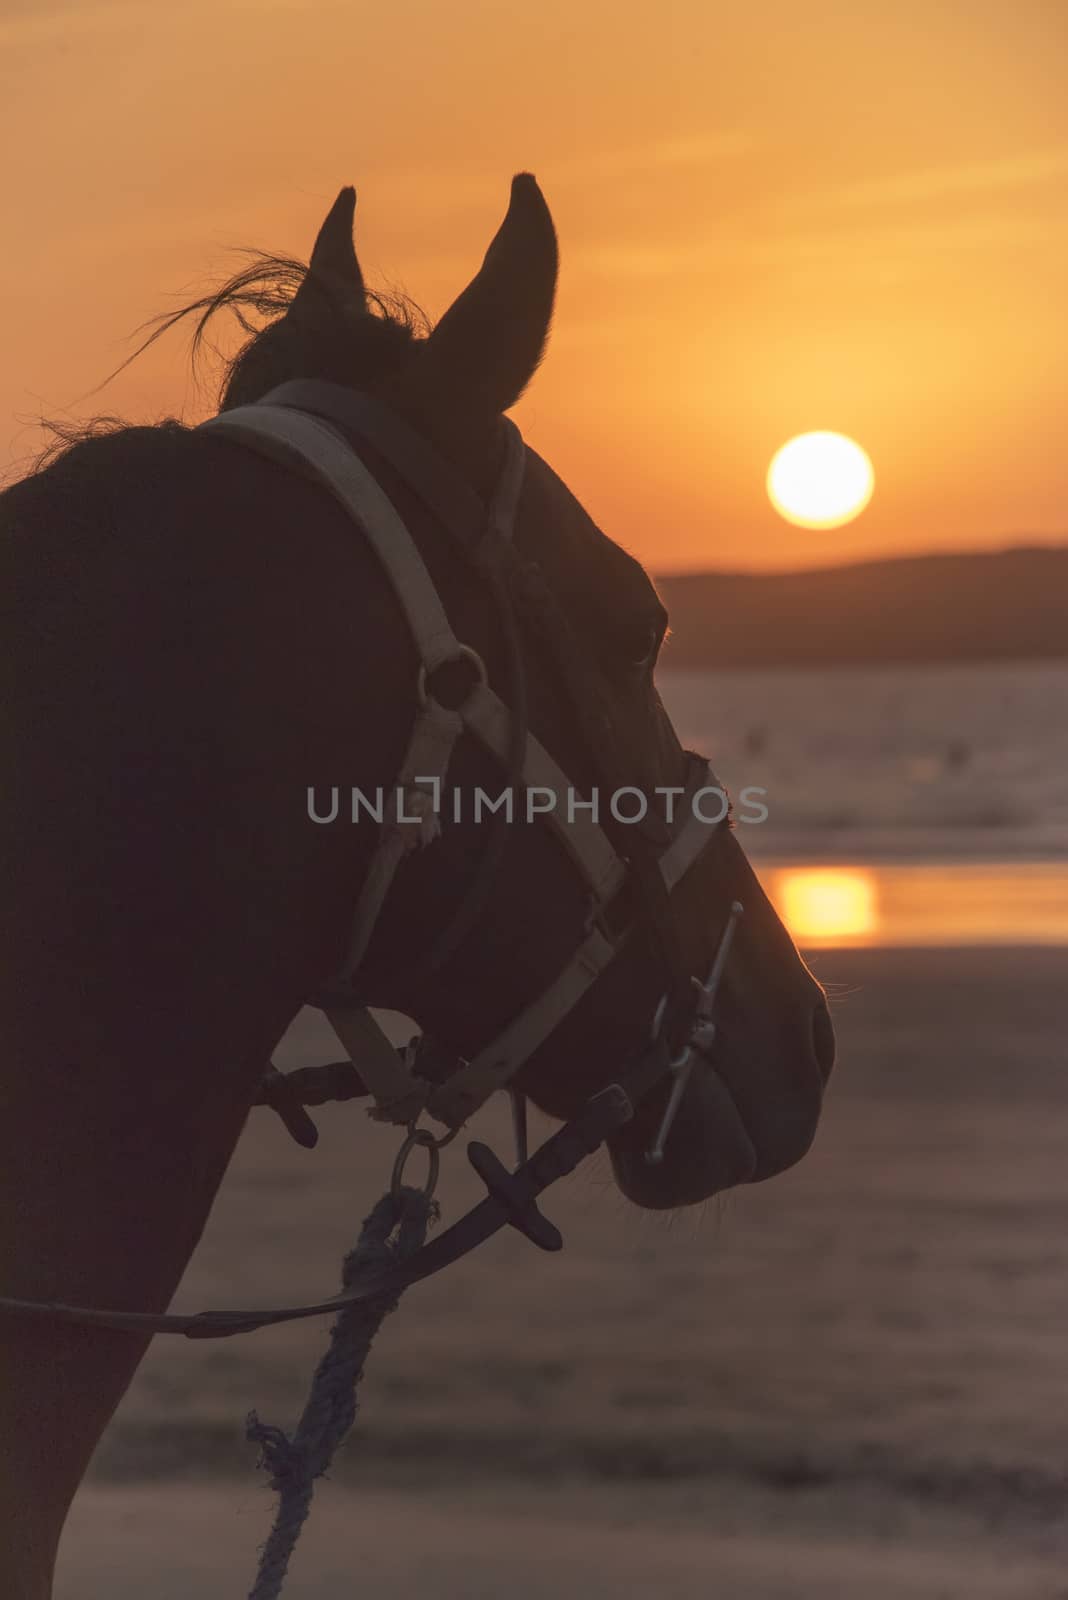 Essaouria, Morocco - September 2017: Horse with a harness looking out to sea - an orange sunset in the back ground
